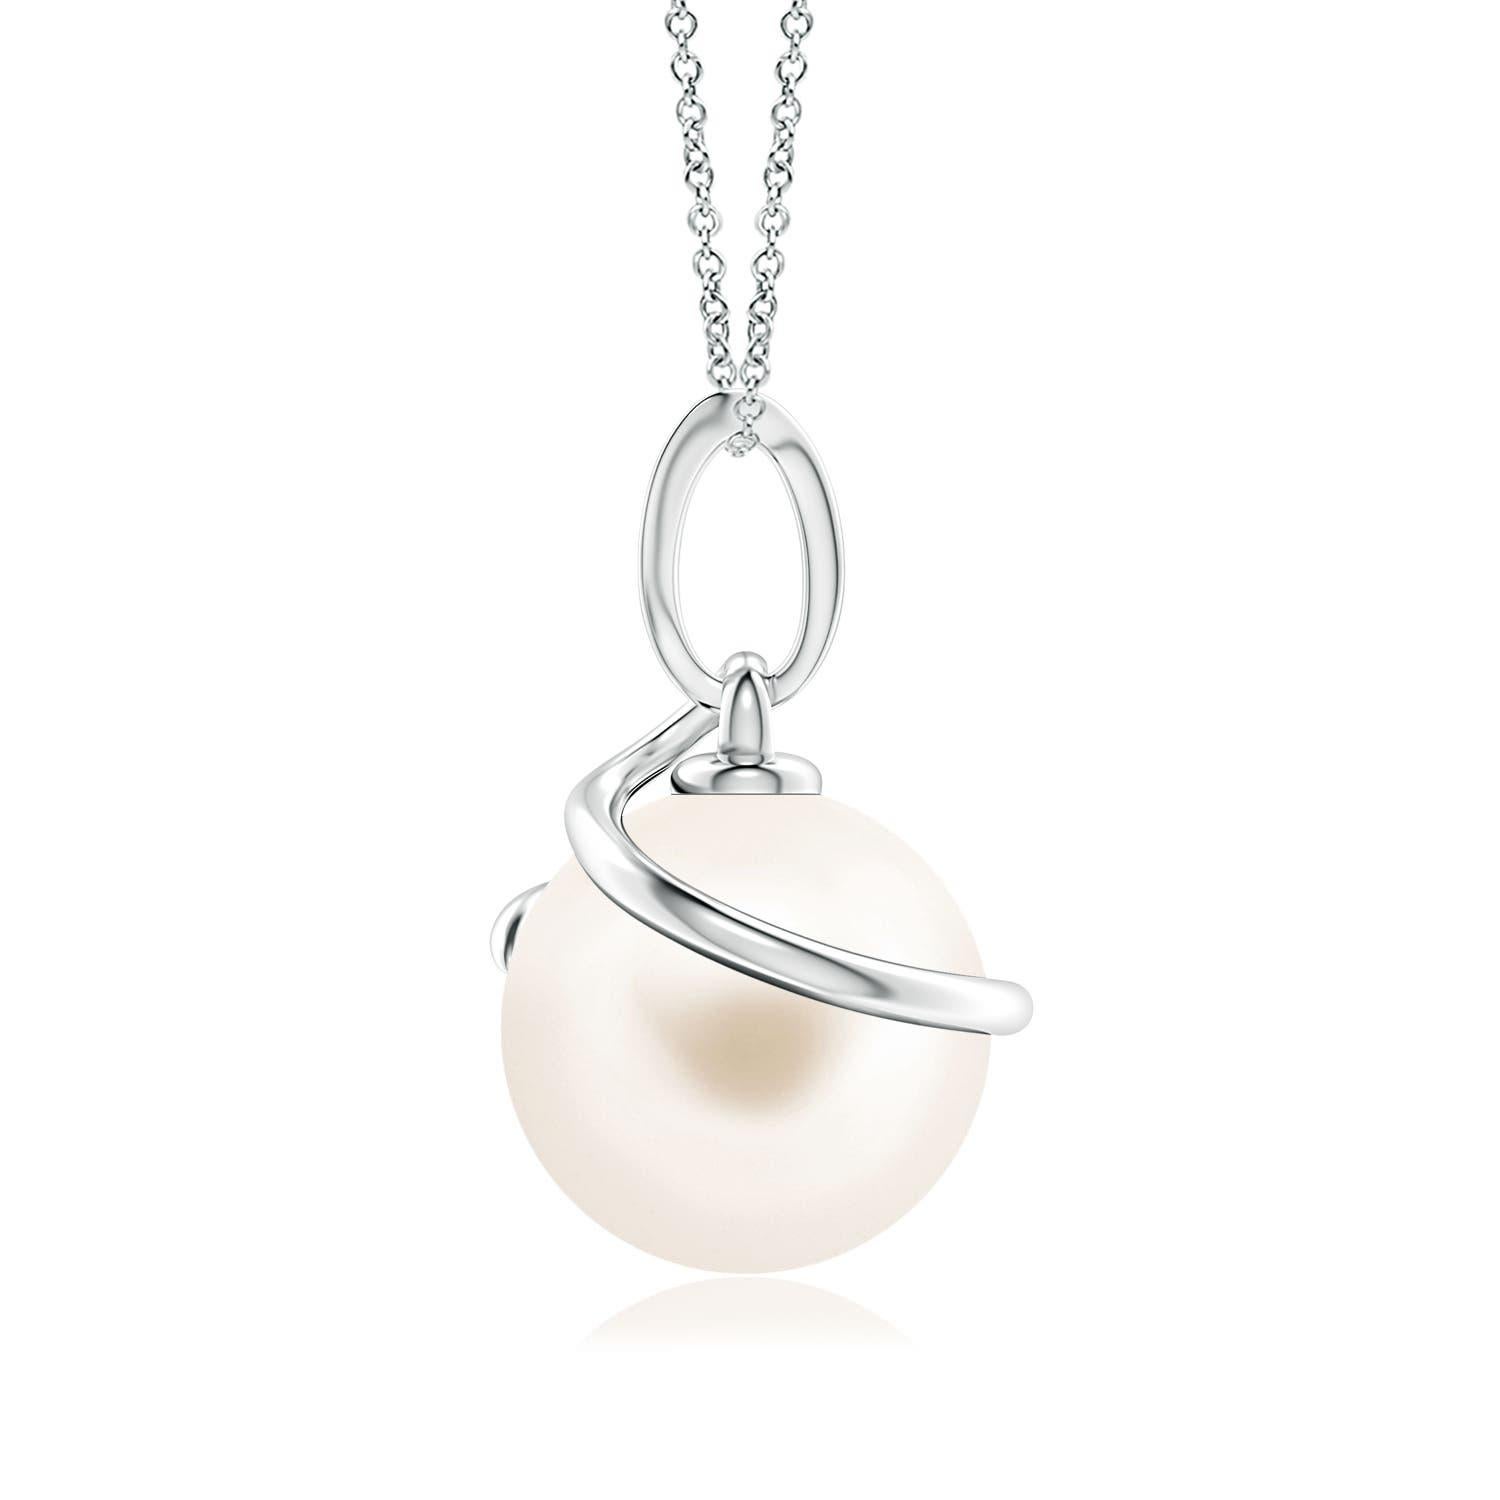 Give an elegant twist to your looks with this Freshwater cultured pearl pendant, crafted in 14k white gold. The beautiful pearl is wrapped by a spiral metal loop and linked to a diamond-studded bale.
Freshwater Cultured Pearl is the Birthstone for